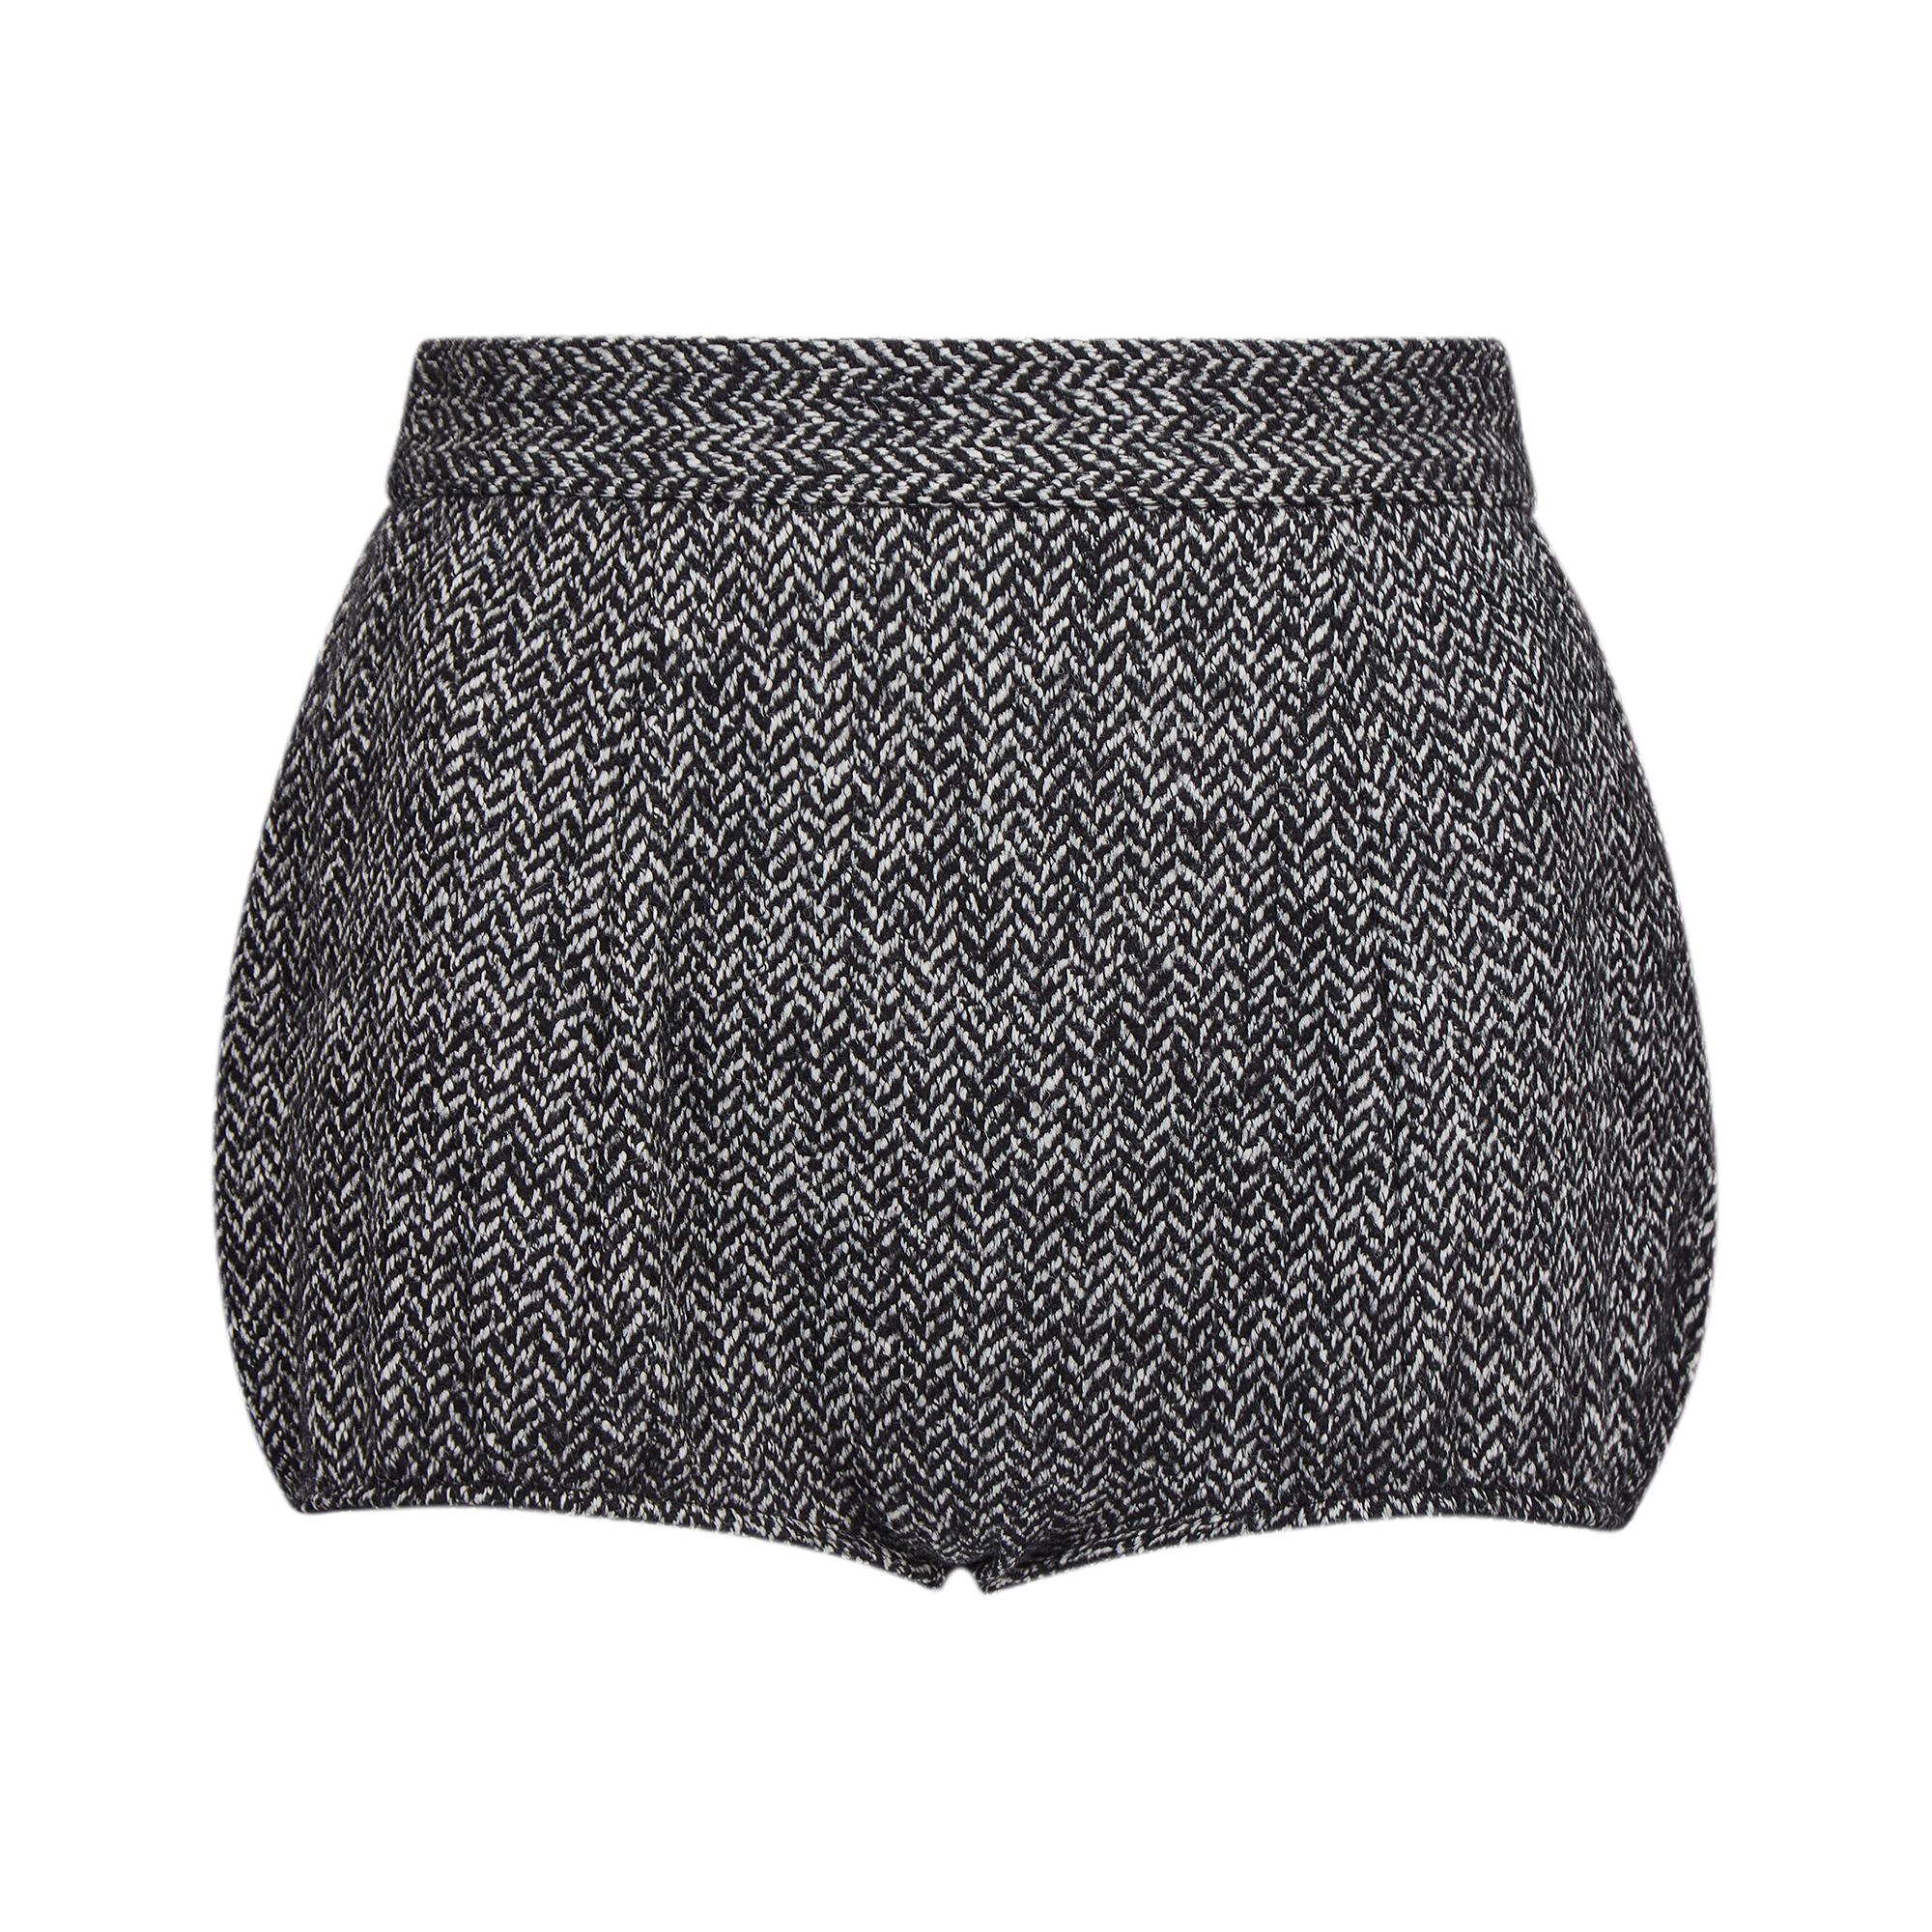 Documented Dolce and Gabbana mainline collection monochrome tweed hot pants. These are the exact version that were featured from the 2013 Fall ready to wear show, look 19 and shown here, look 24 on the runway. 

They are of a very pure, pin-up style